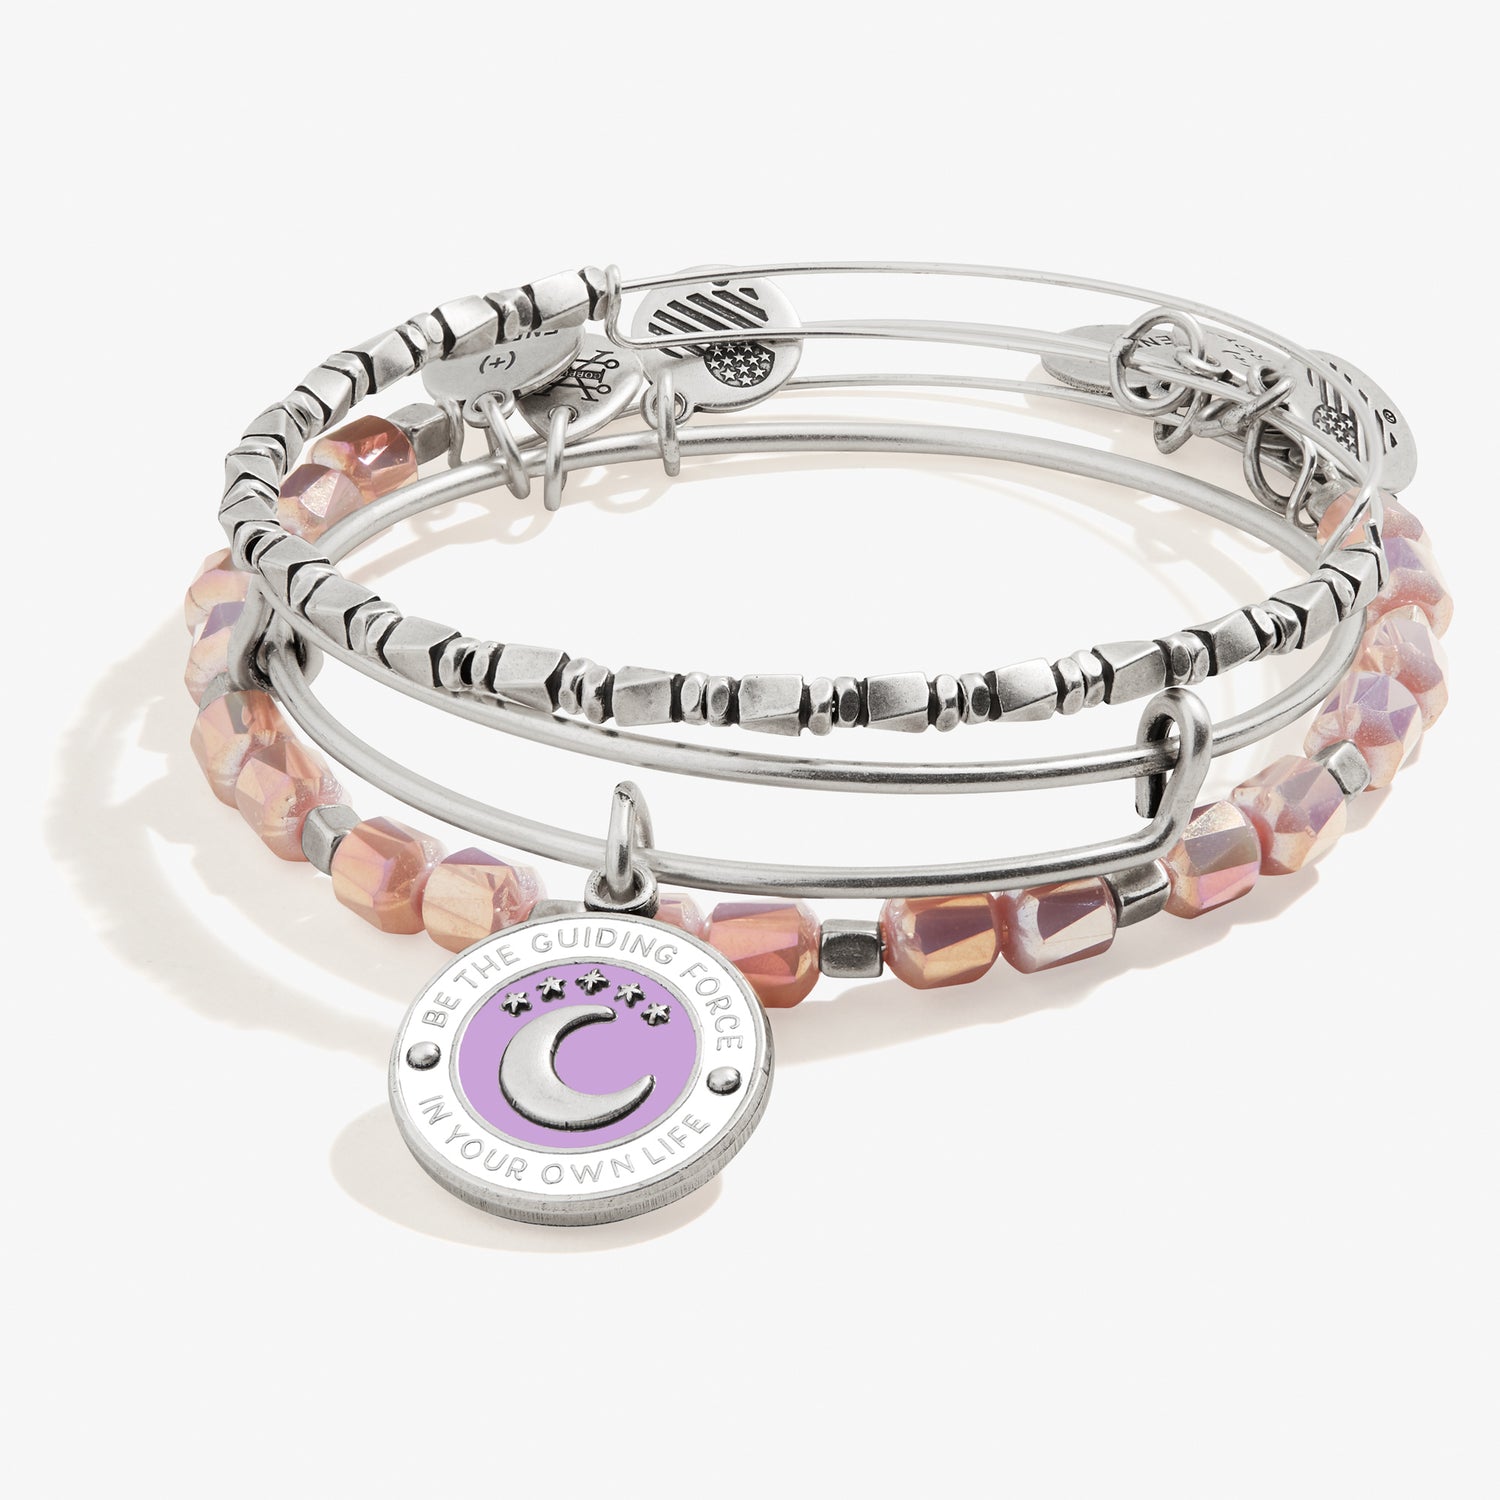 Be the Guiding Force' Charm + Beaded Bangles, Set of 3